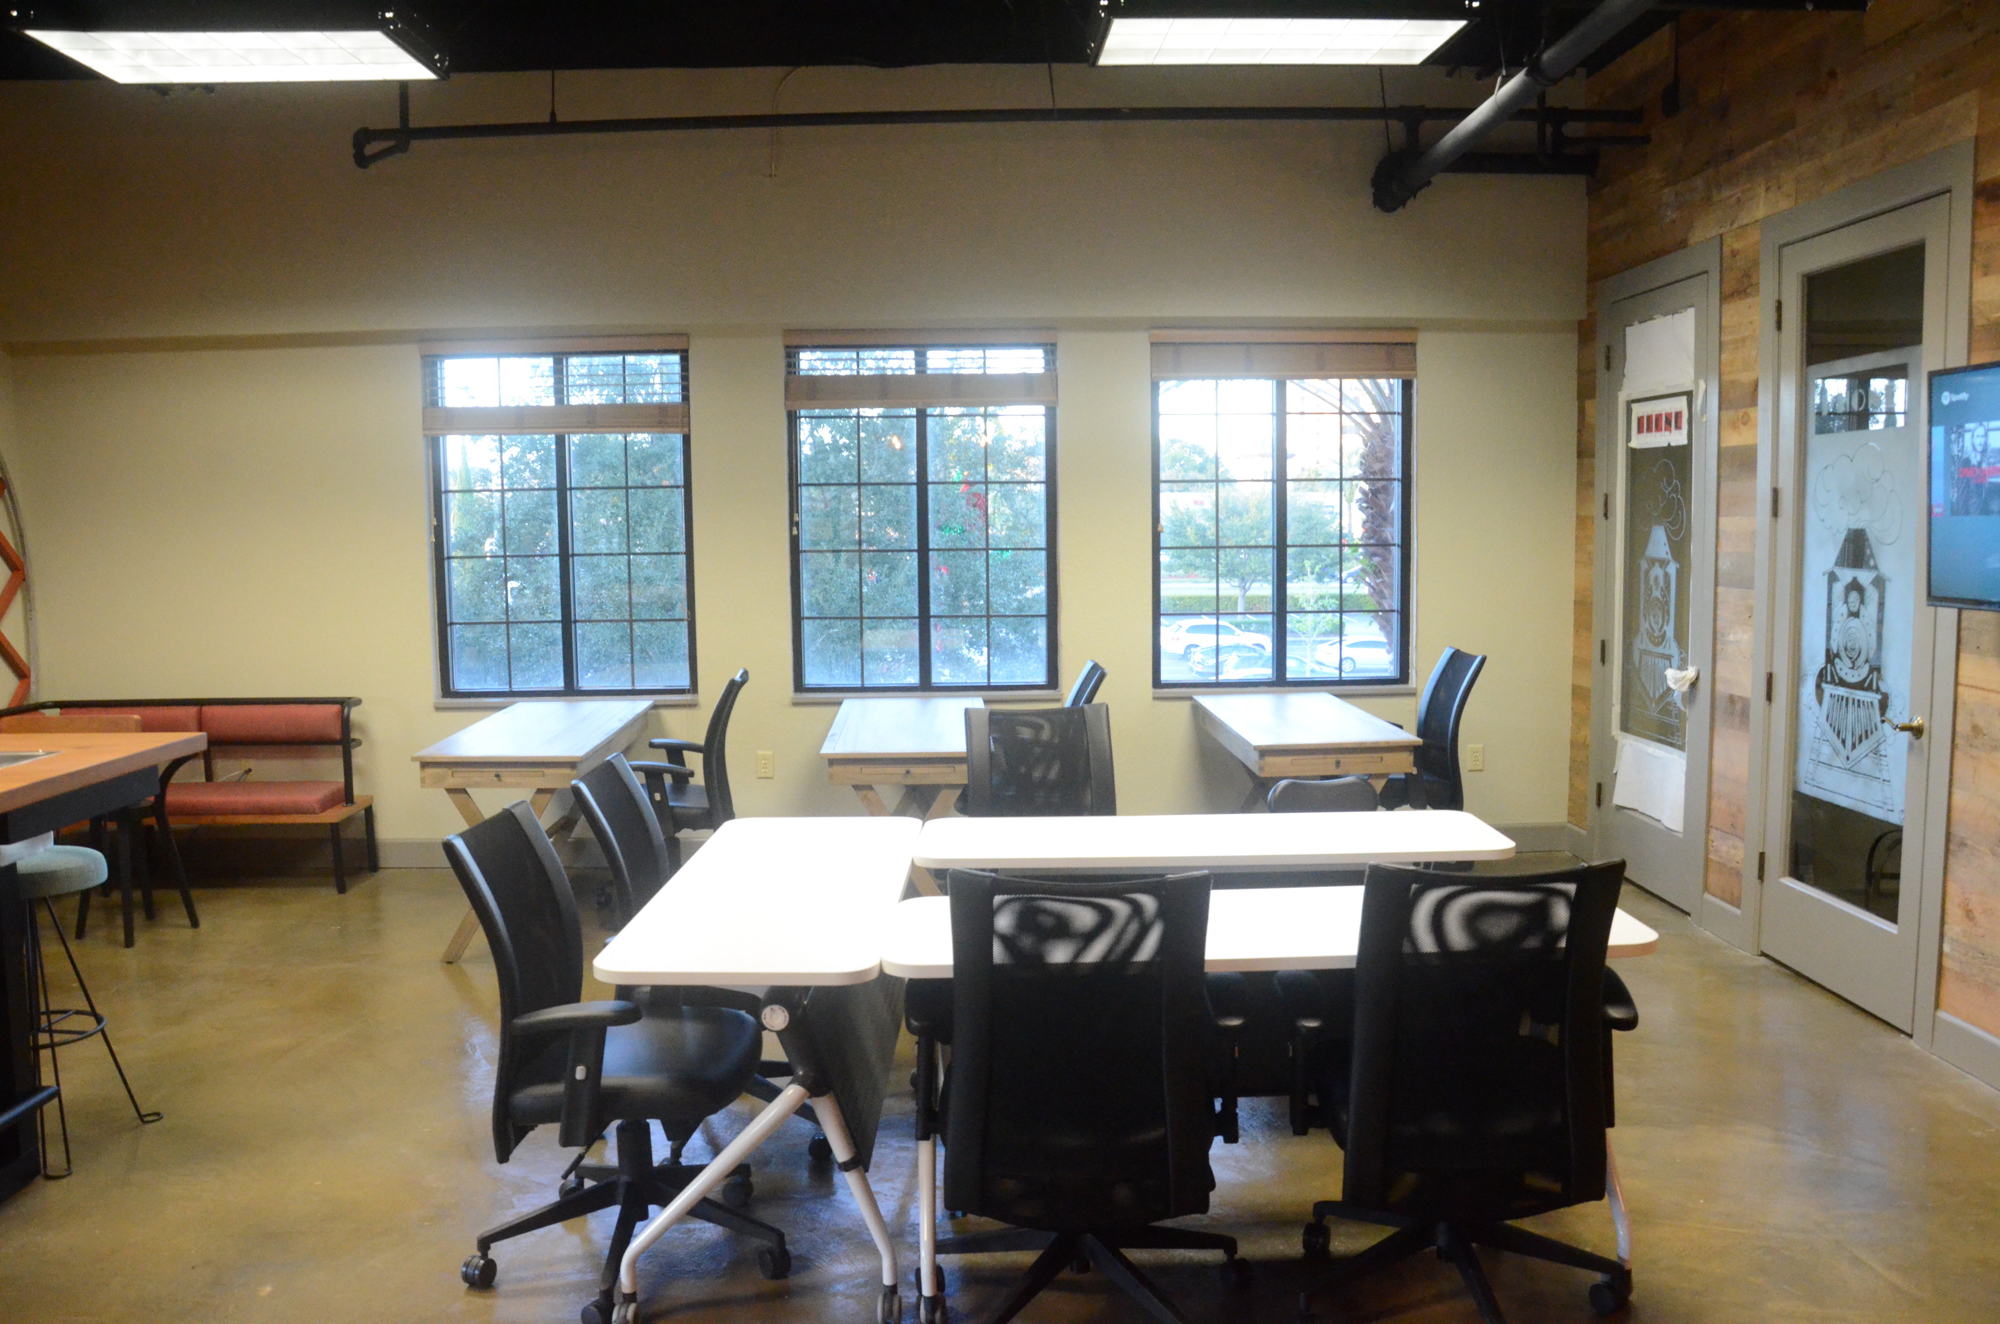 HUB 925 includes an assortment of workspace options for members.